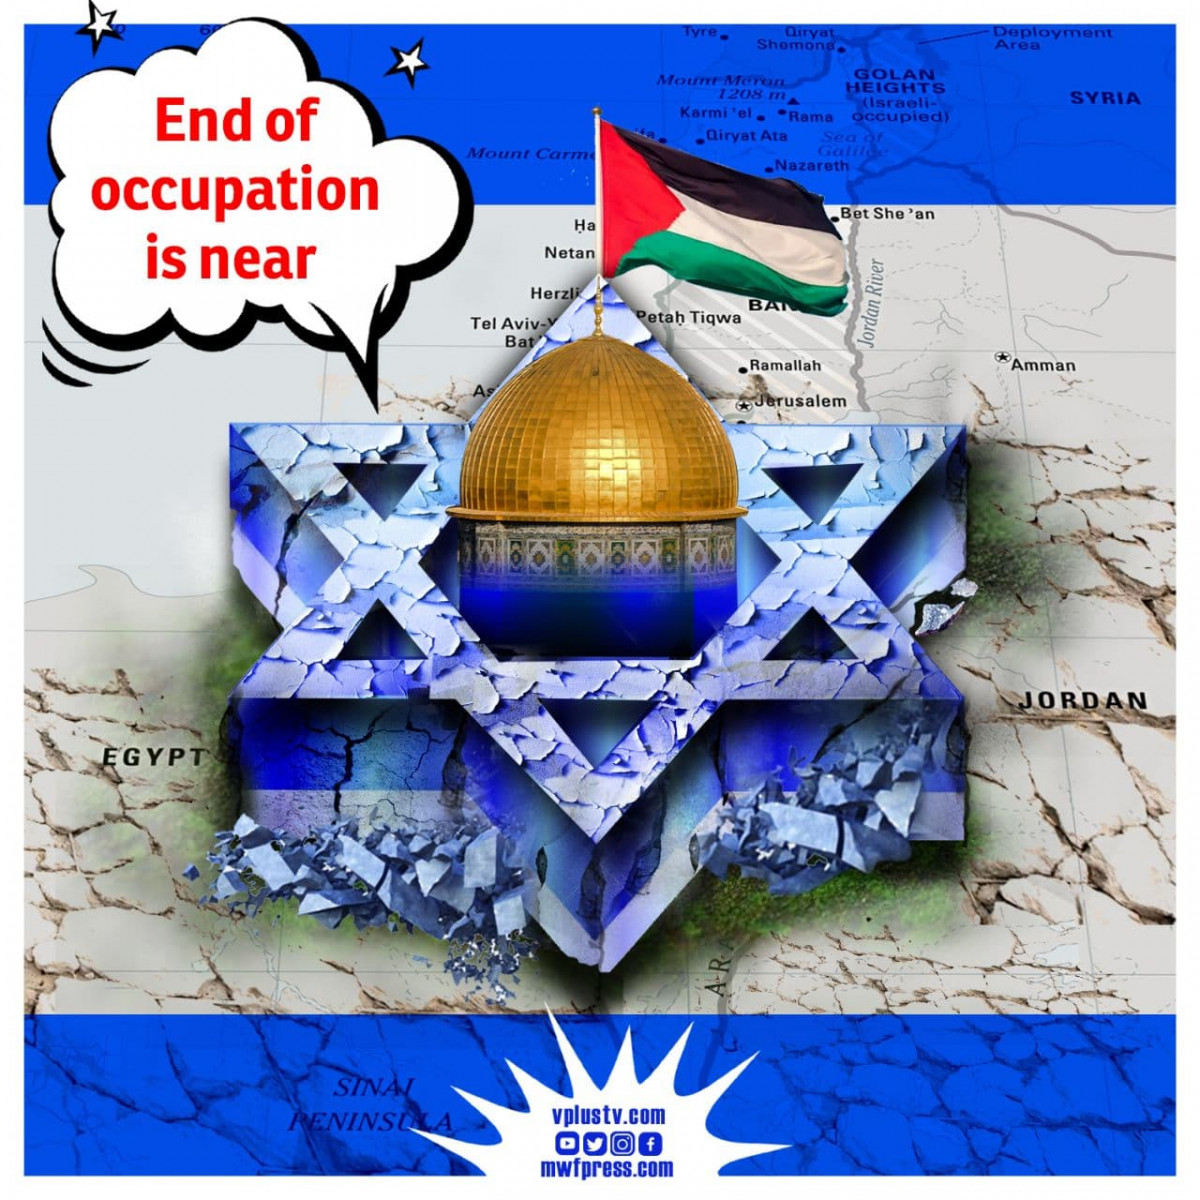 End of occupation is near